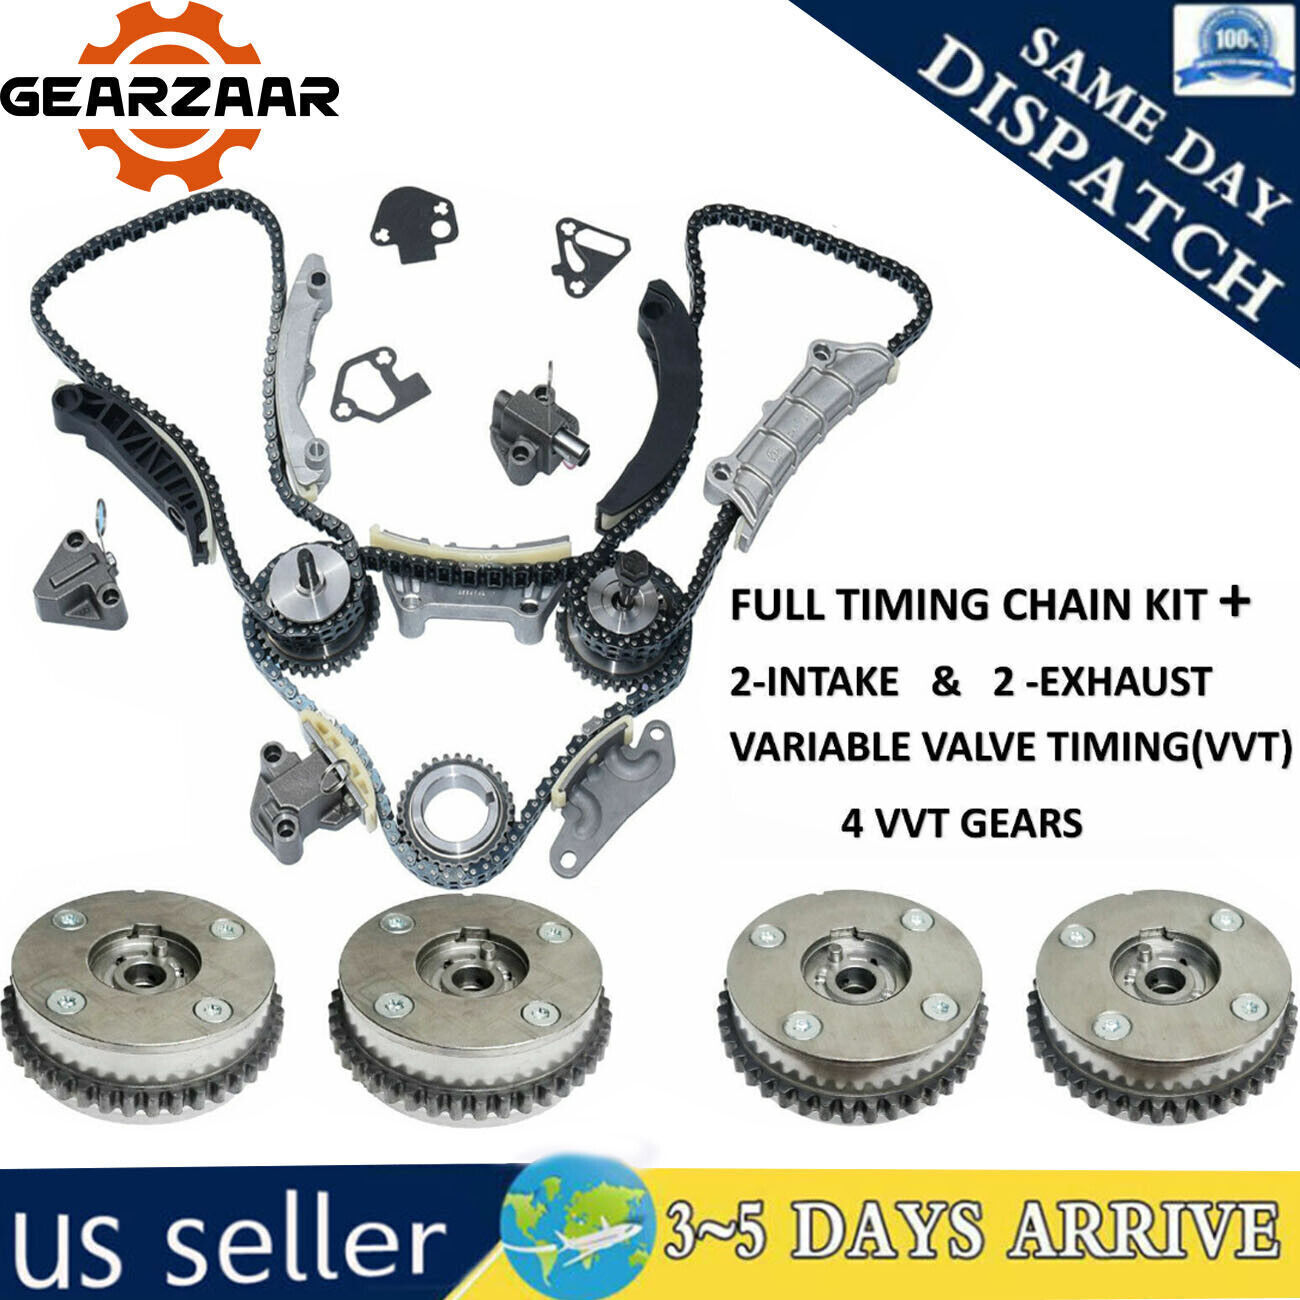 COMPLETE KIT TIMING CHAIN+ 4VVT CAM PHASER INT& EXH for 3.03.6L EQUINOX CTS SRX